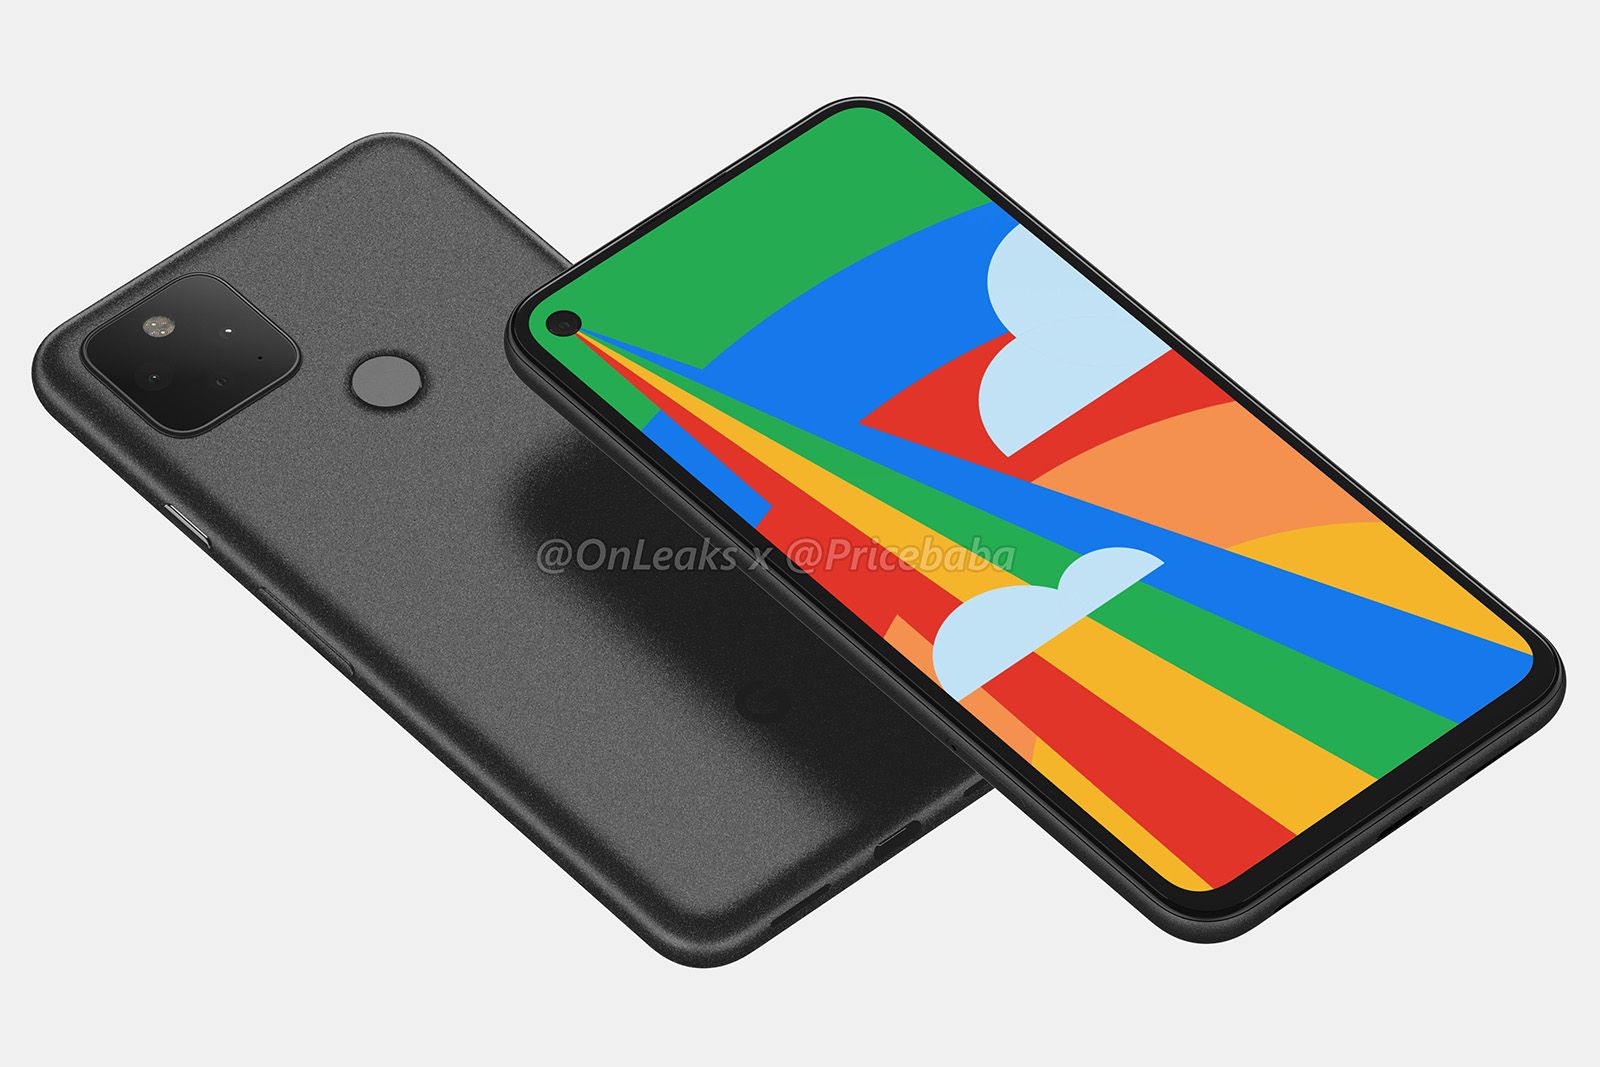 Pixel 5 and Pixel 4a 5G prices and availability leaks via online retailers photo 1